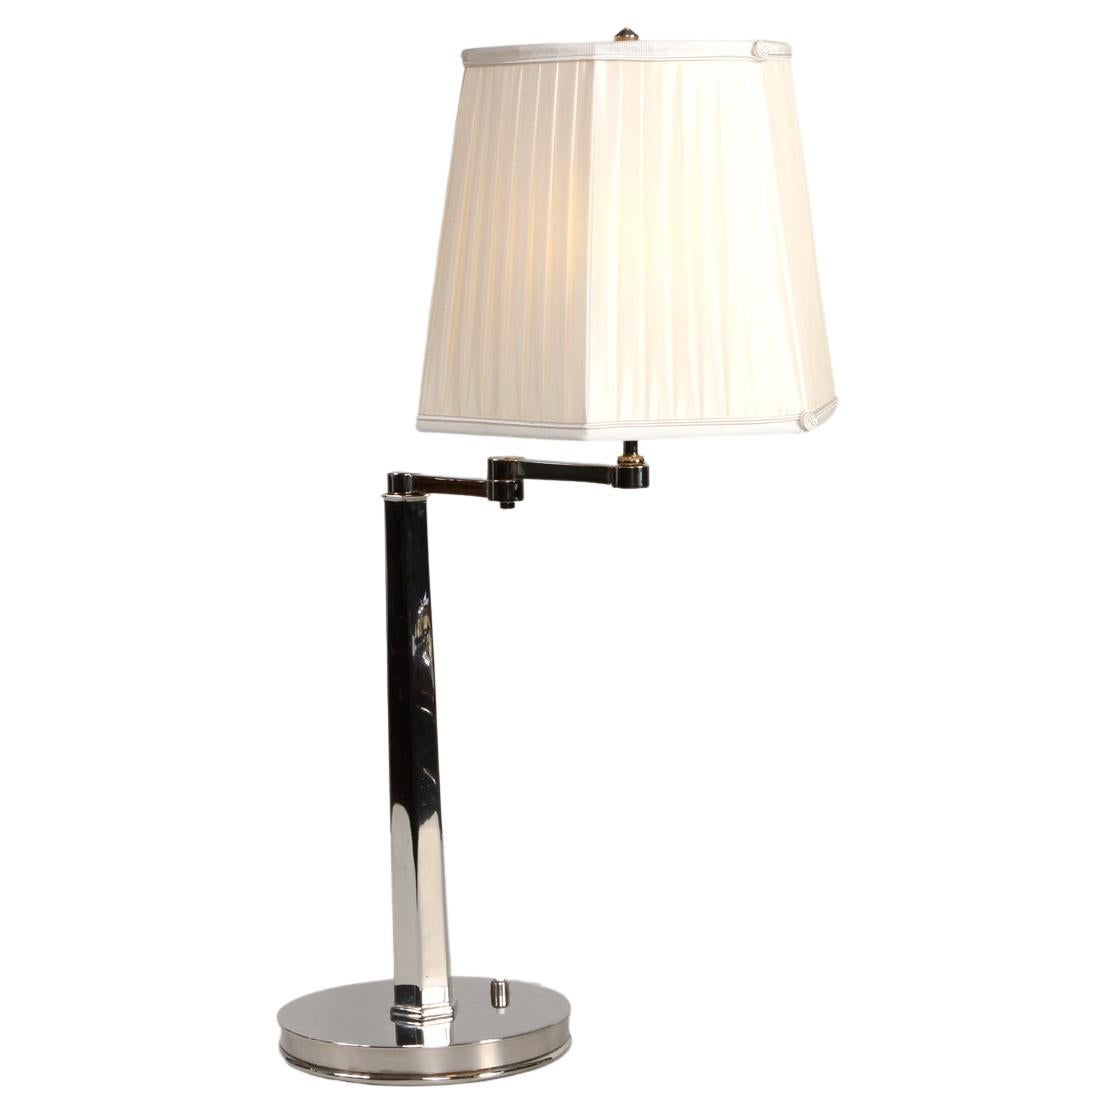 French Art deco table lamp by Dominique 